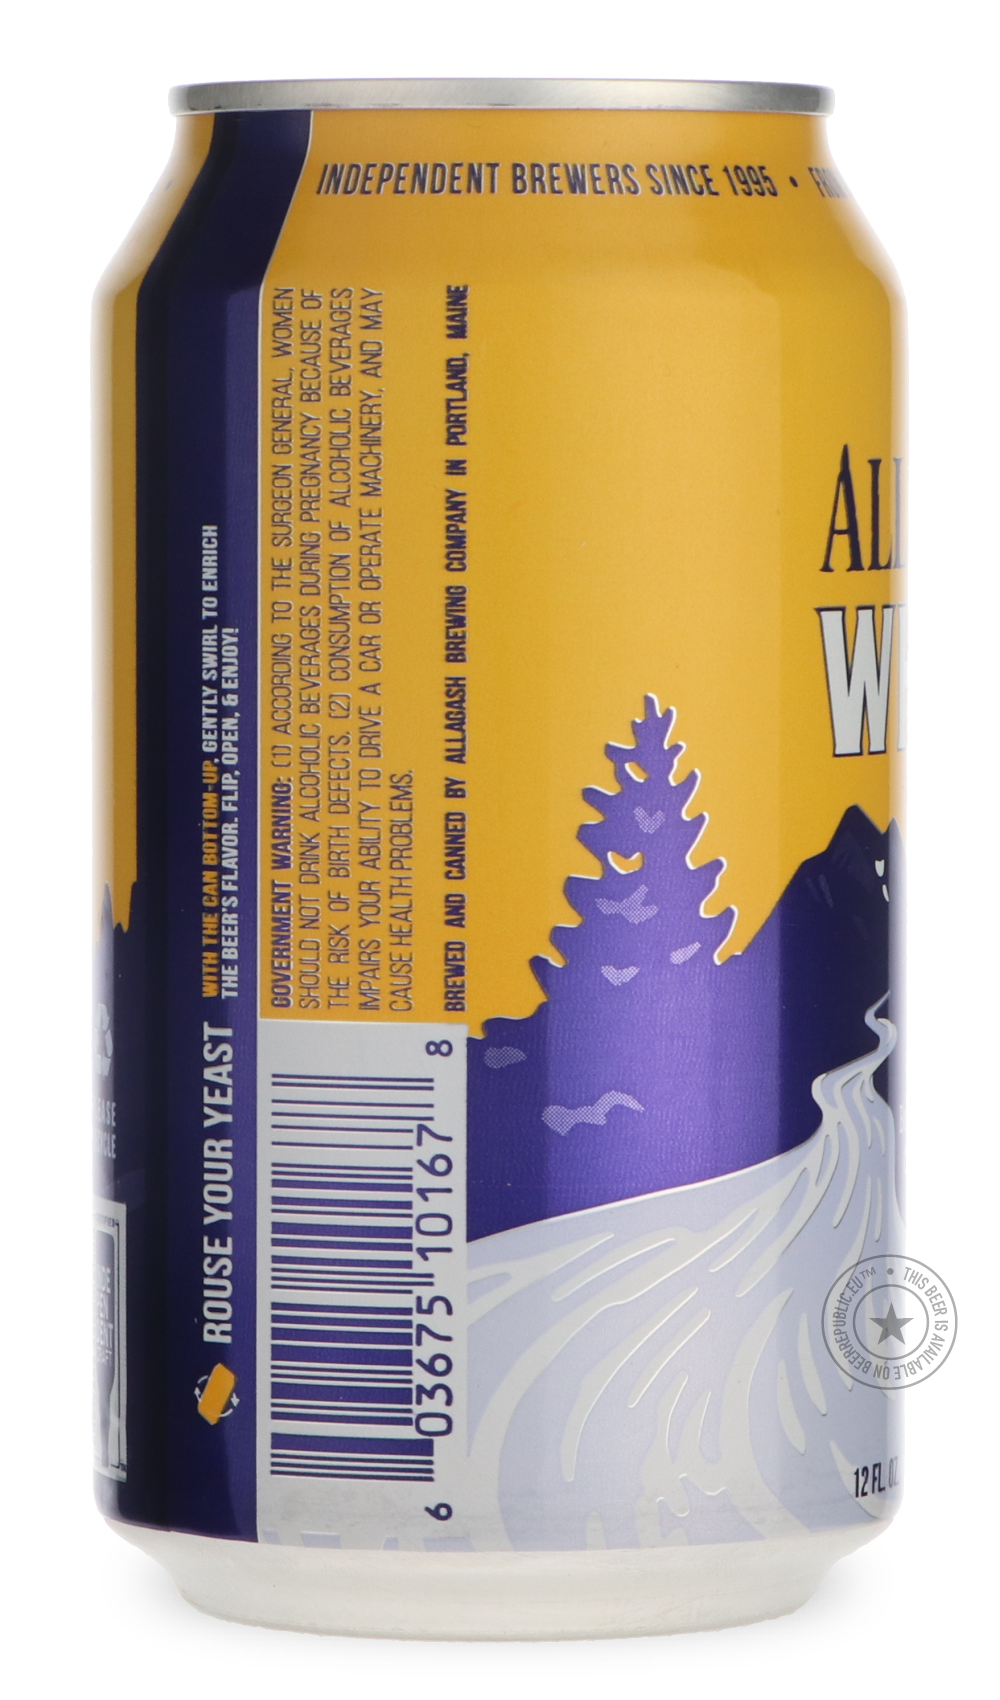 -Allagash- White [355ml can]-Pale- Only @ Beer Republic - The best online beer store for American & Canadian craft beer - Buy beer online from the USA and Canada - Bier online kopen - Amerikaans bier kopen - Craft beer store - Craft beer kopen - Amerikanisch bier kaufen - Bier online kaufen - Acheter biere online - IPA - Stout - Porter - New England IPA - Hazy IPA - Imperial Stout - Barrel Aged - Barrel Aged Imperial Stout - Brown - Dark beer - Blond - Blonde - Pilsner - Lager - Wheat - Weizen - Amber - Bar